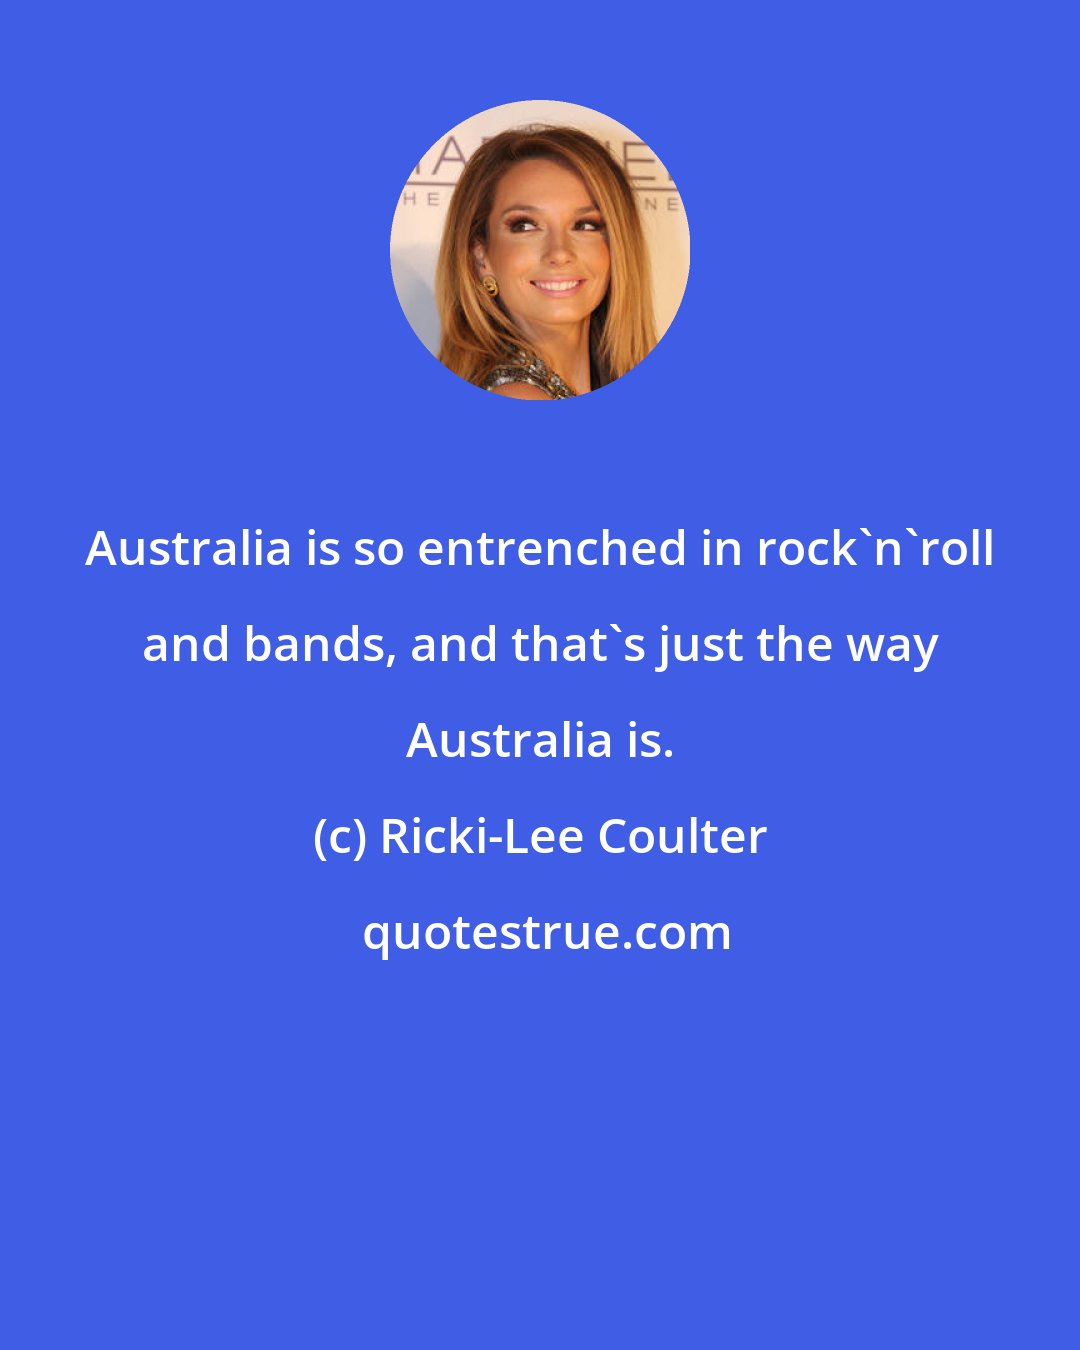 Ricki-Lee Coulter: Australia is so entrenched in rock'n'roll and bands, and that's just the way Australia is.